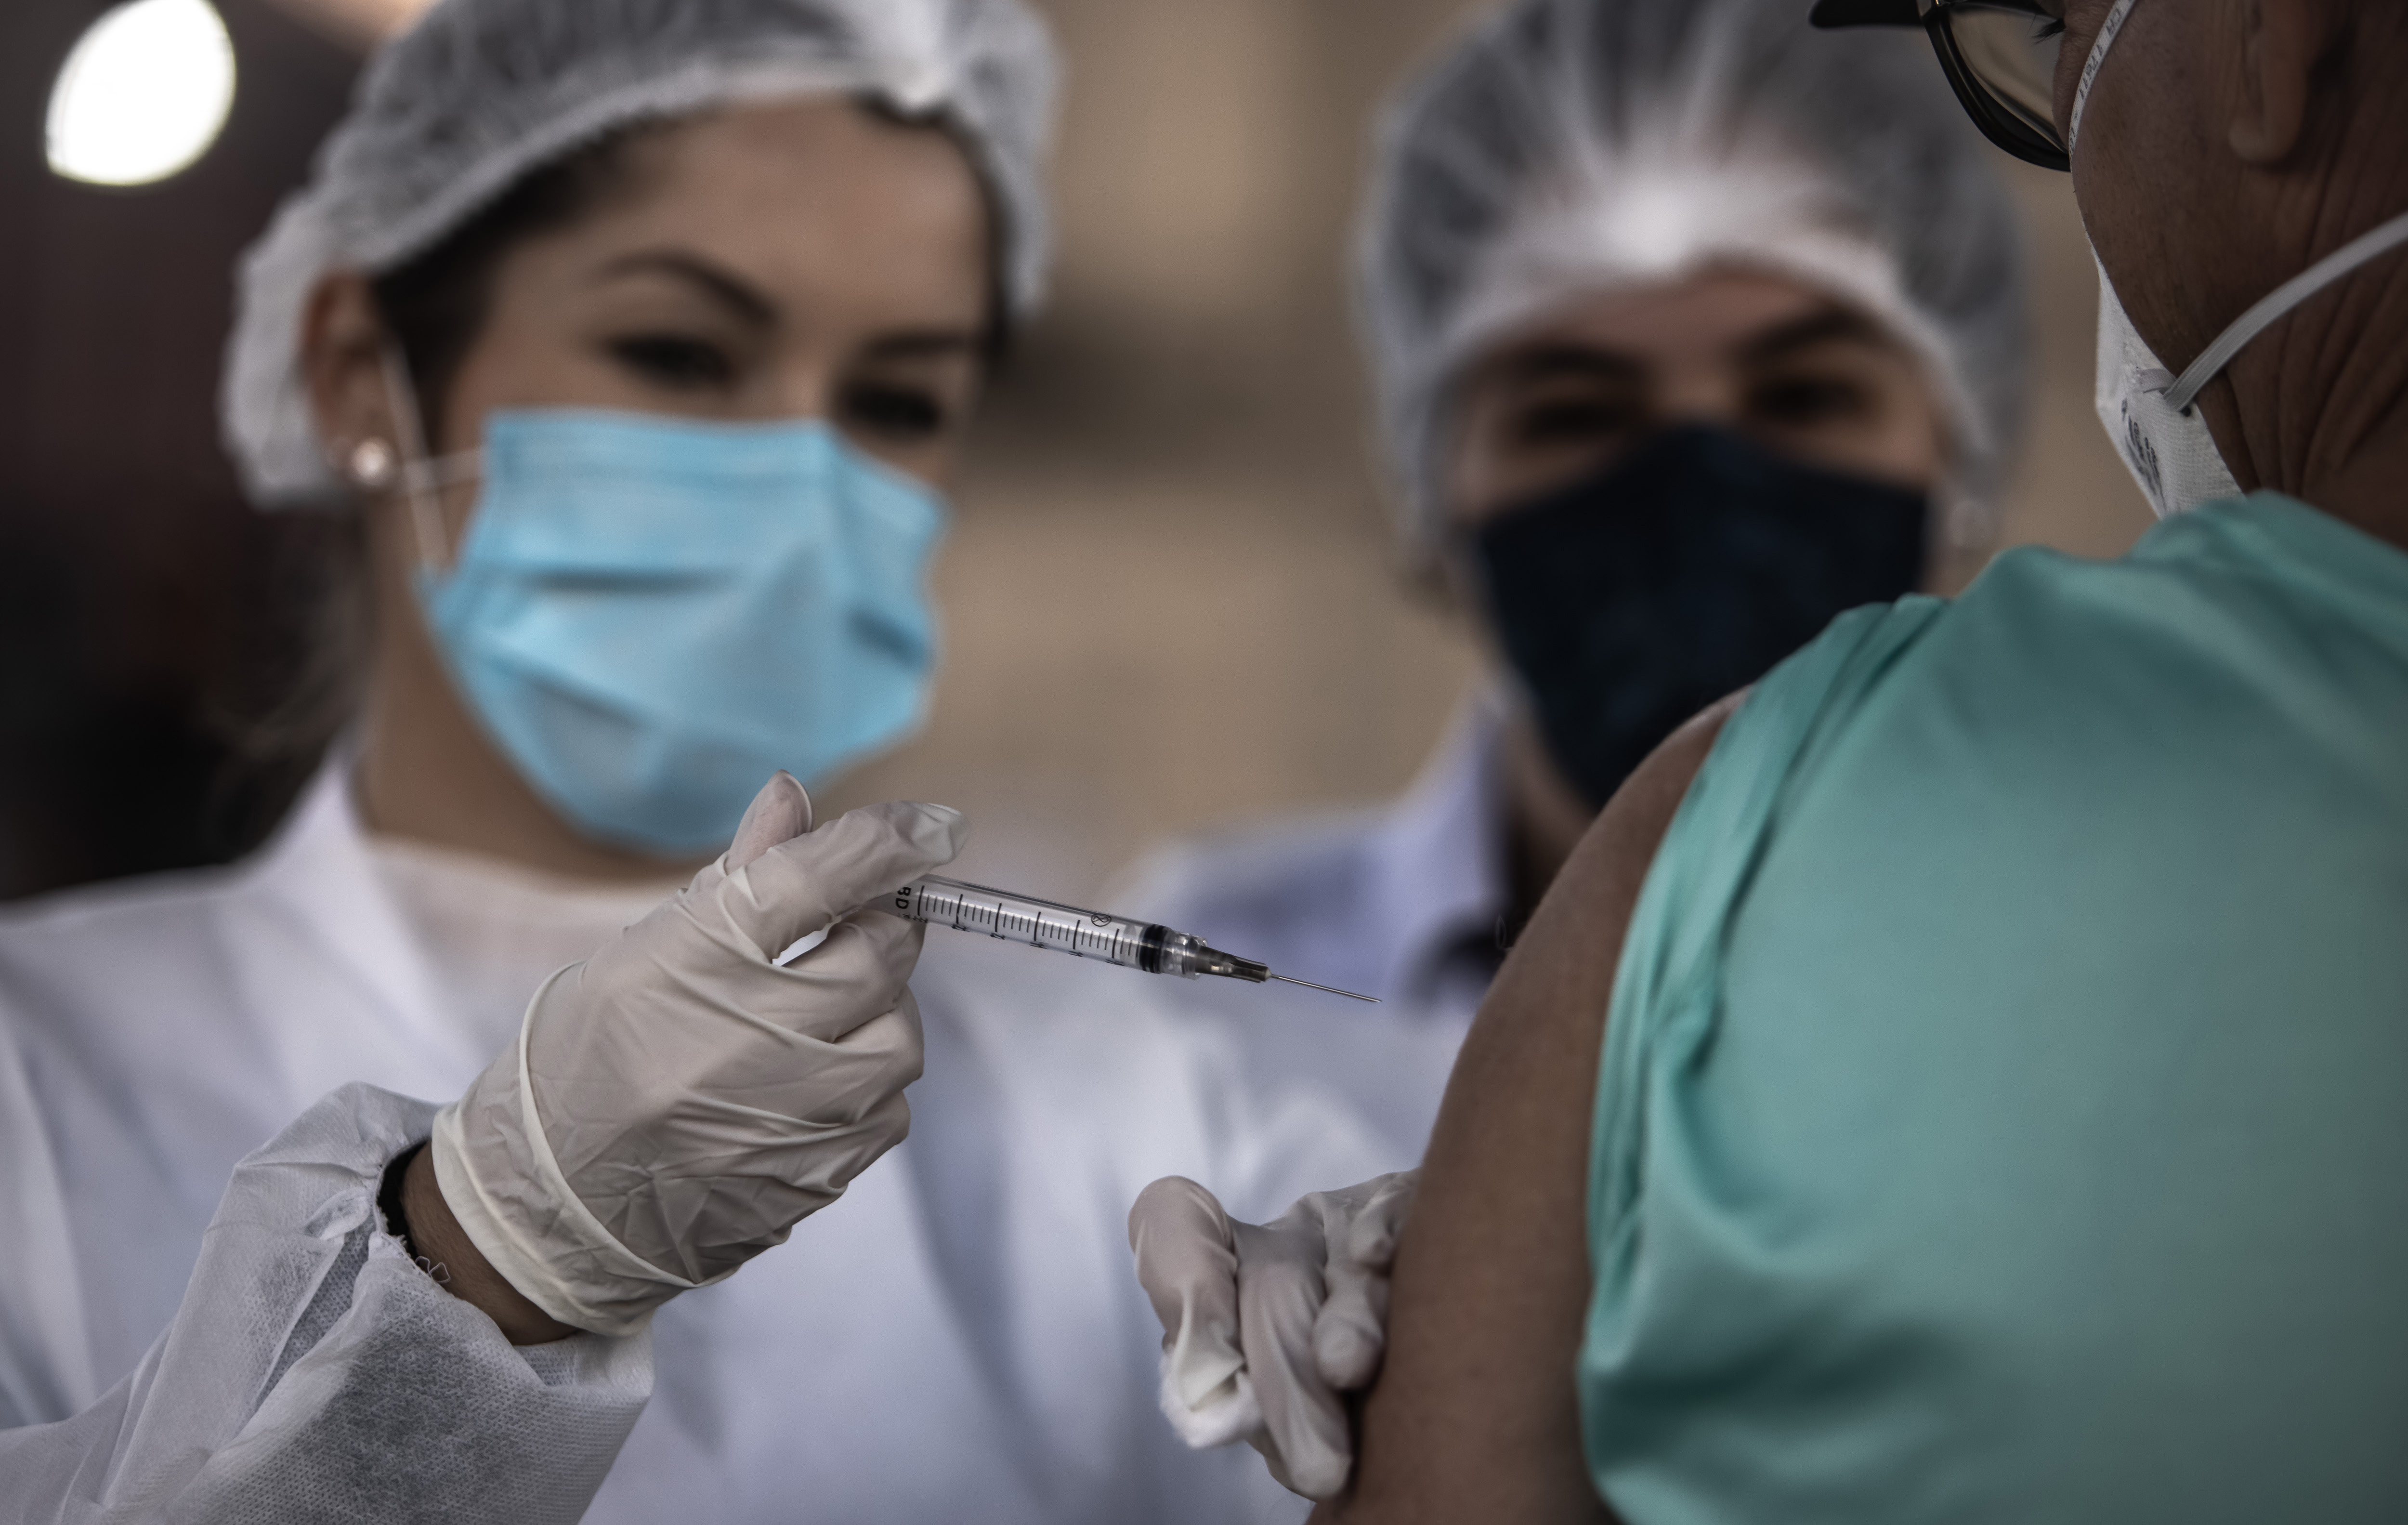 A total of 57.1 million COVID-19 vaccine doses have now been administered in Brazil, with an estimated rate of 945,574 doses per day.